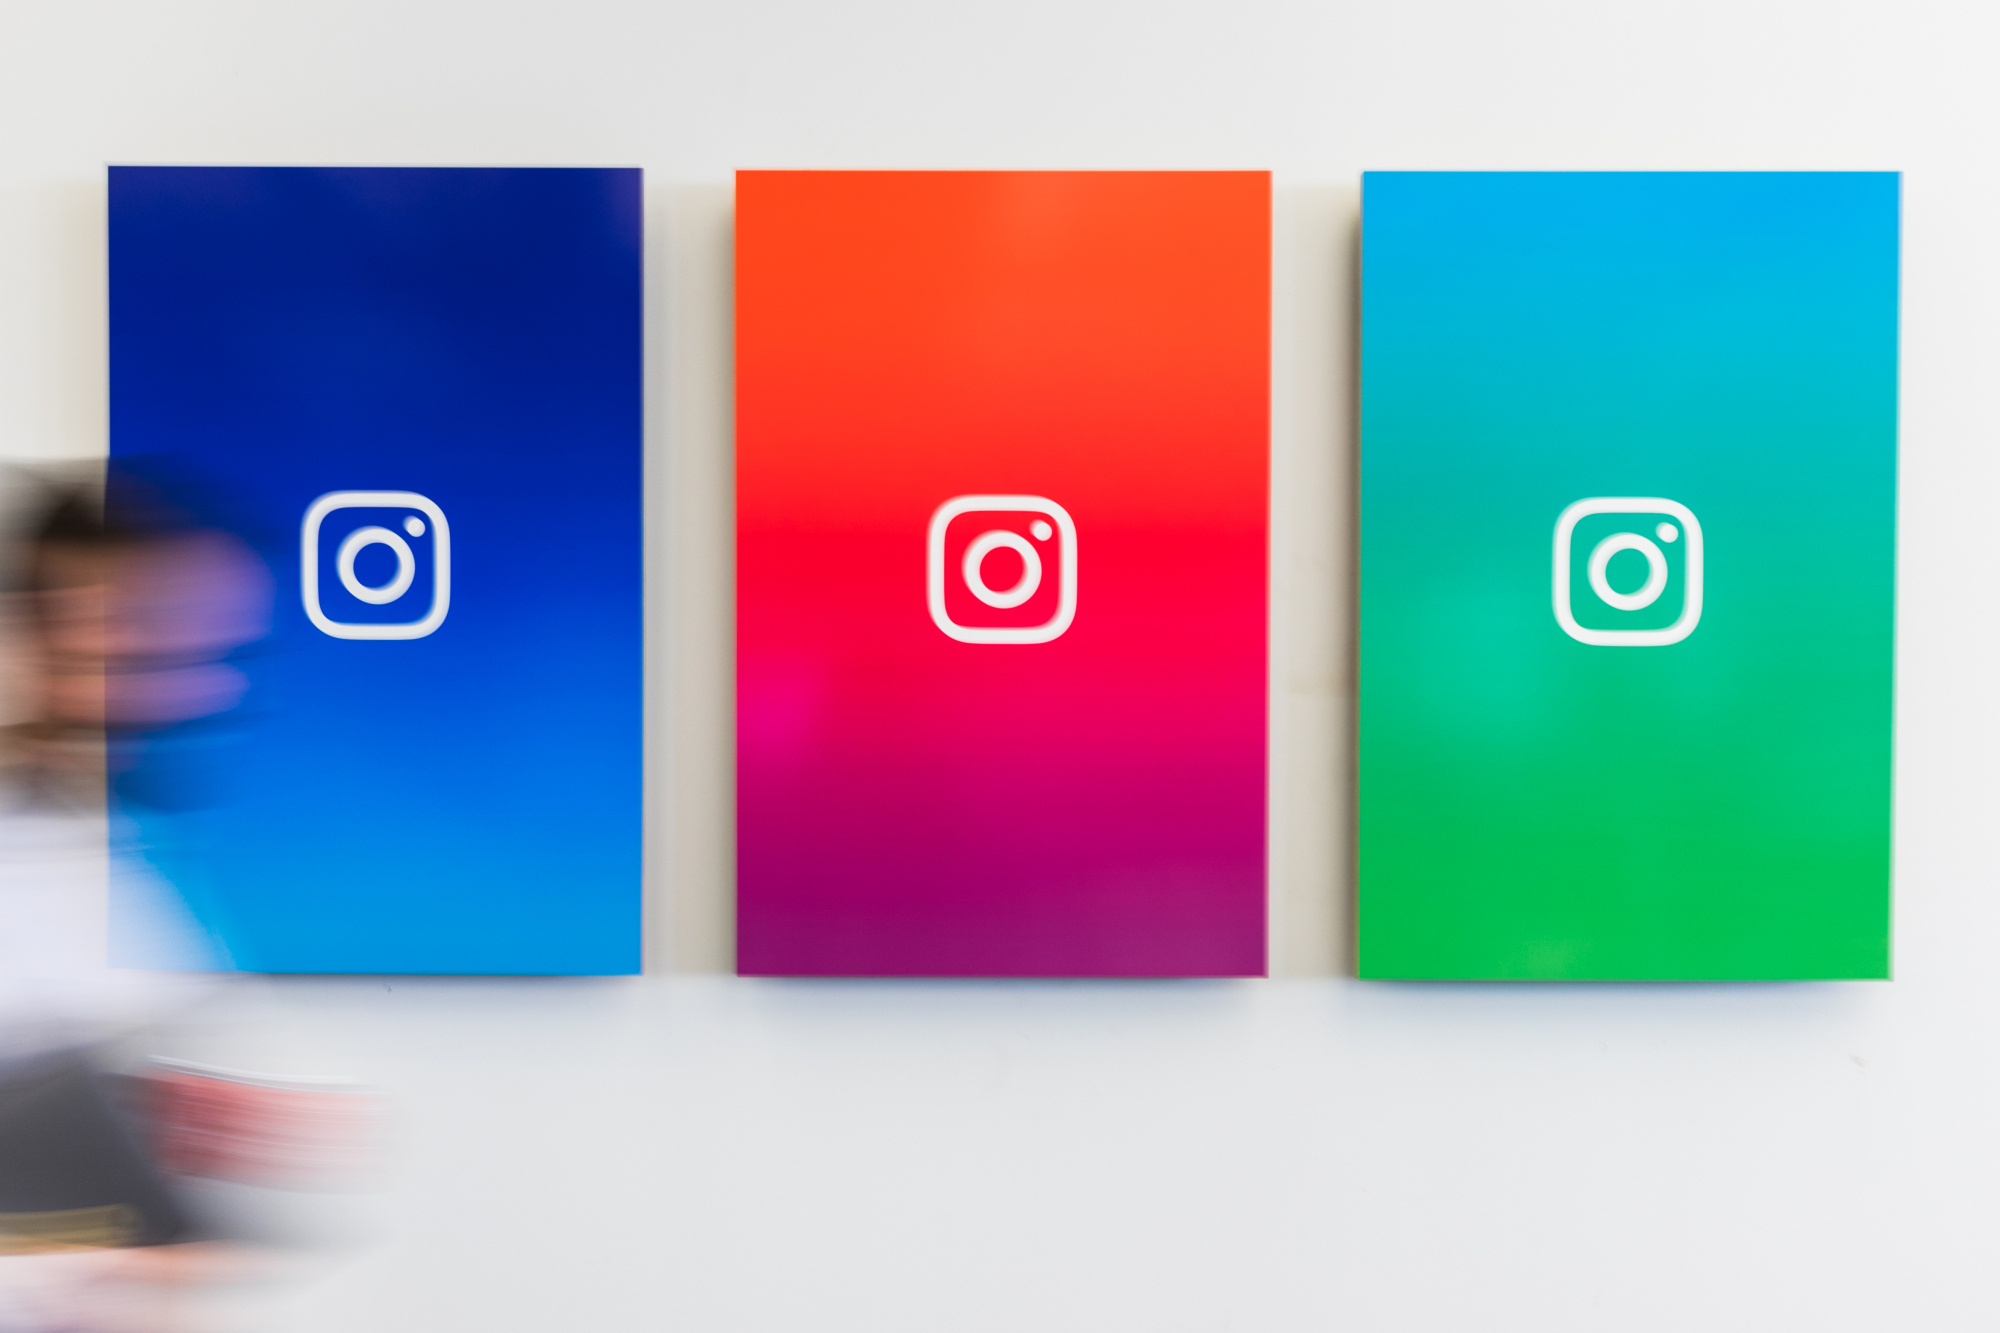 An employee walks past branded posters displayed at the Instagram Inc. office in New York, U.S., on Monday, June 4, 2018. Once, Instagram was a simple photo-sharing app, a way for iPhone shutterbugs to show off their latest cool pics. Now, its visual nature and 1 billion active users have sellers salivating over its potential as a place to sell everything from dresses to furniture. Photographer: Jeenah Moon/Bloomberg